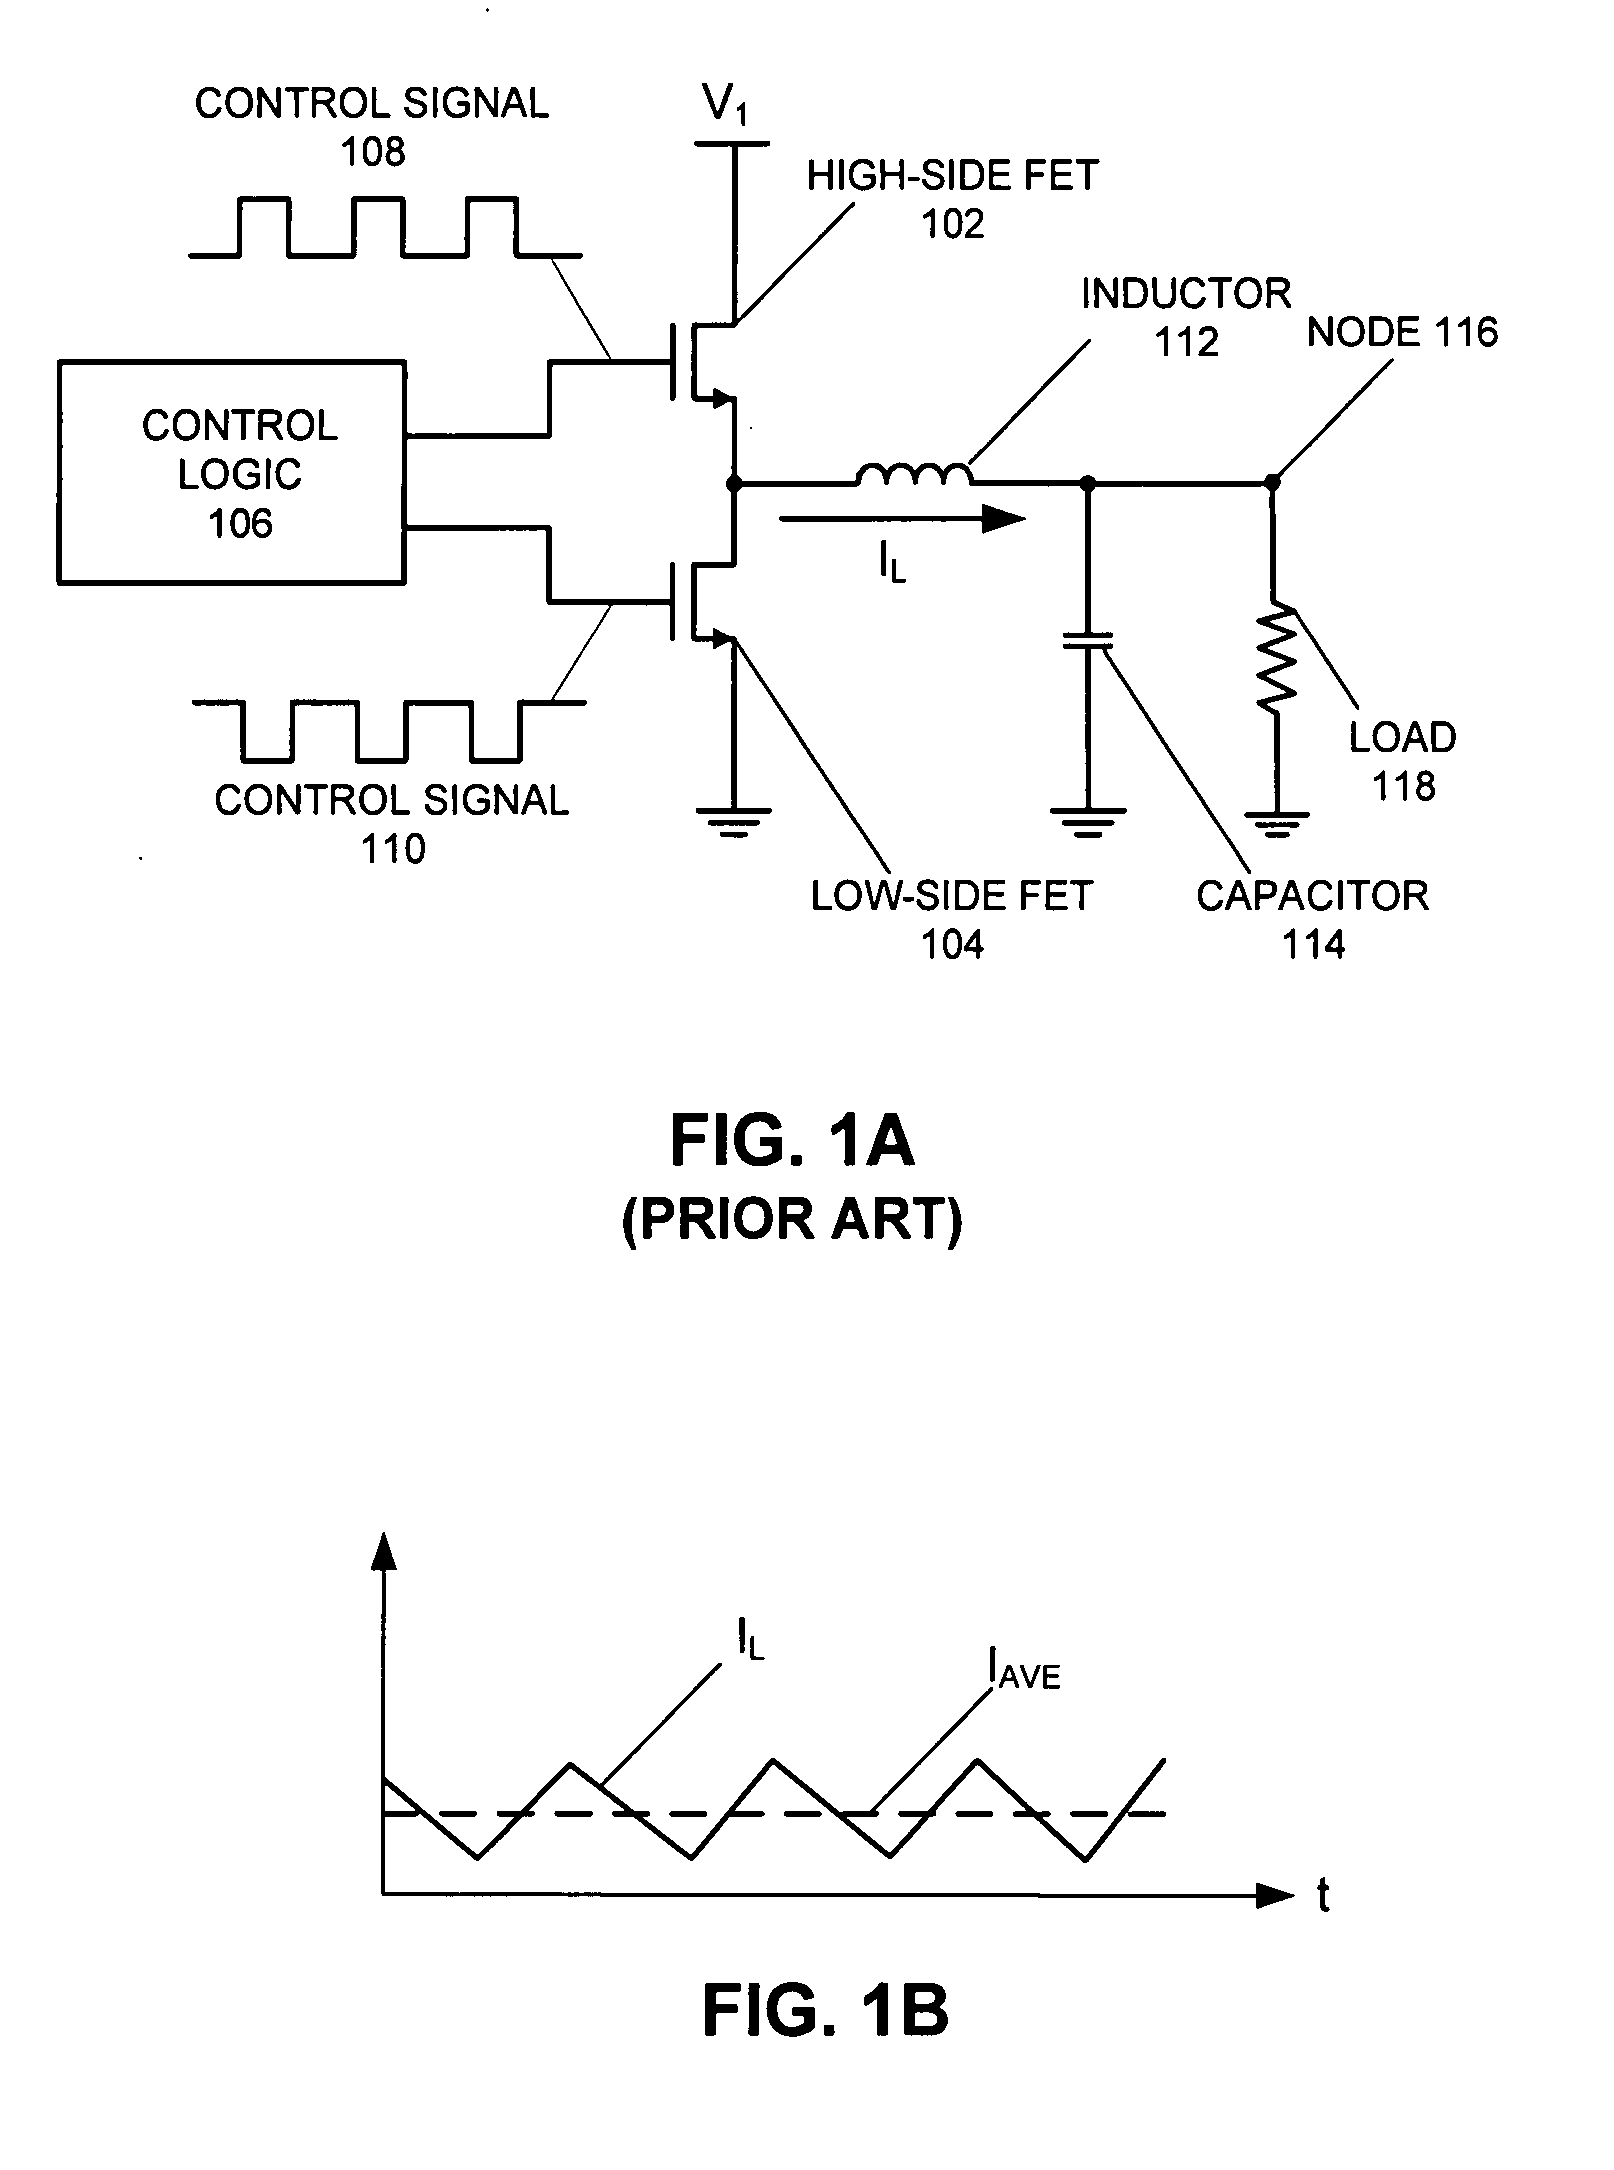 Method and apparatus for measuring the output current of a switching regulator